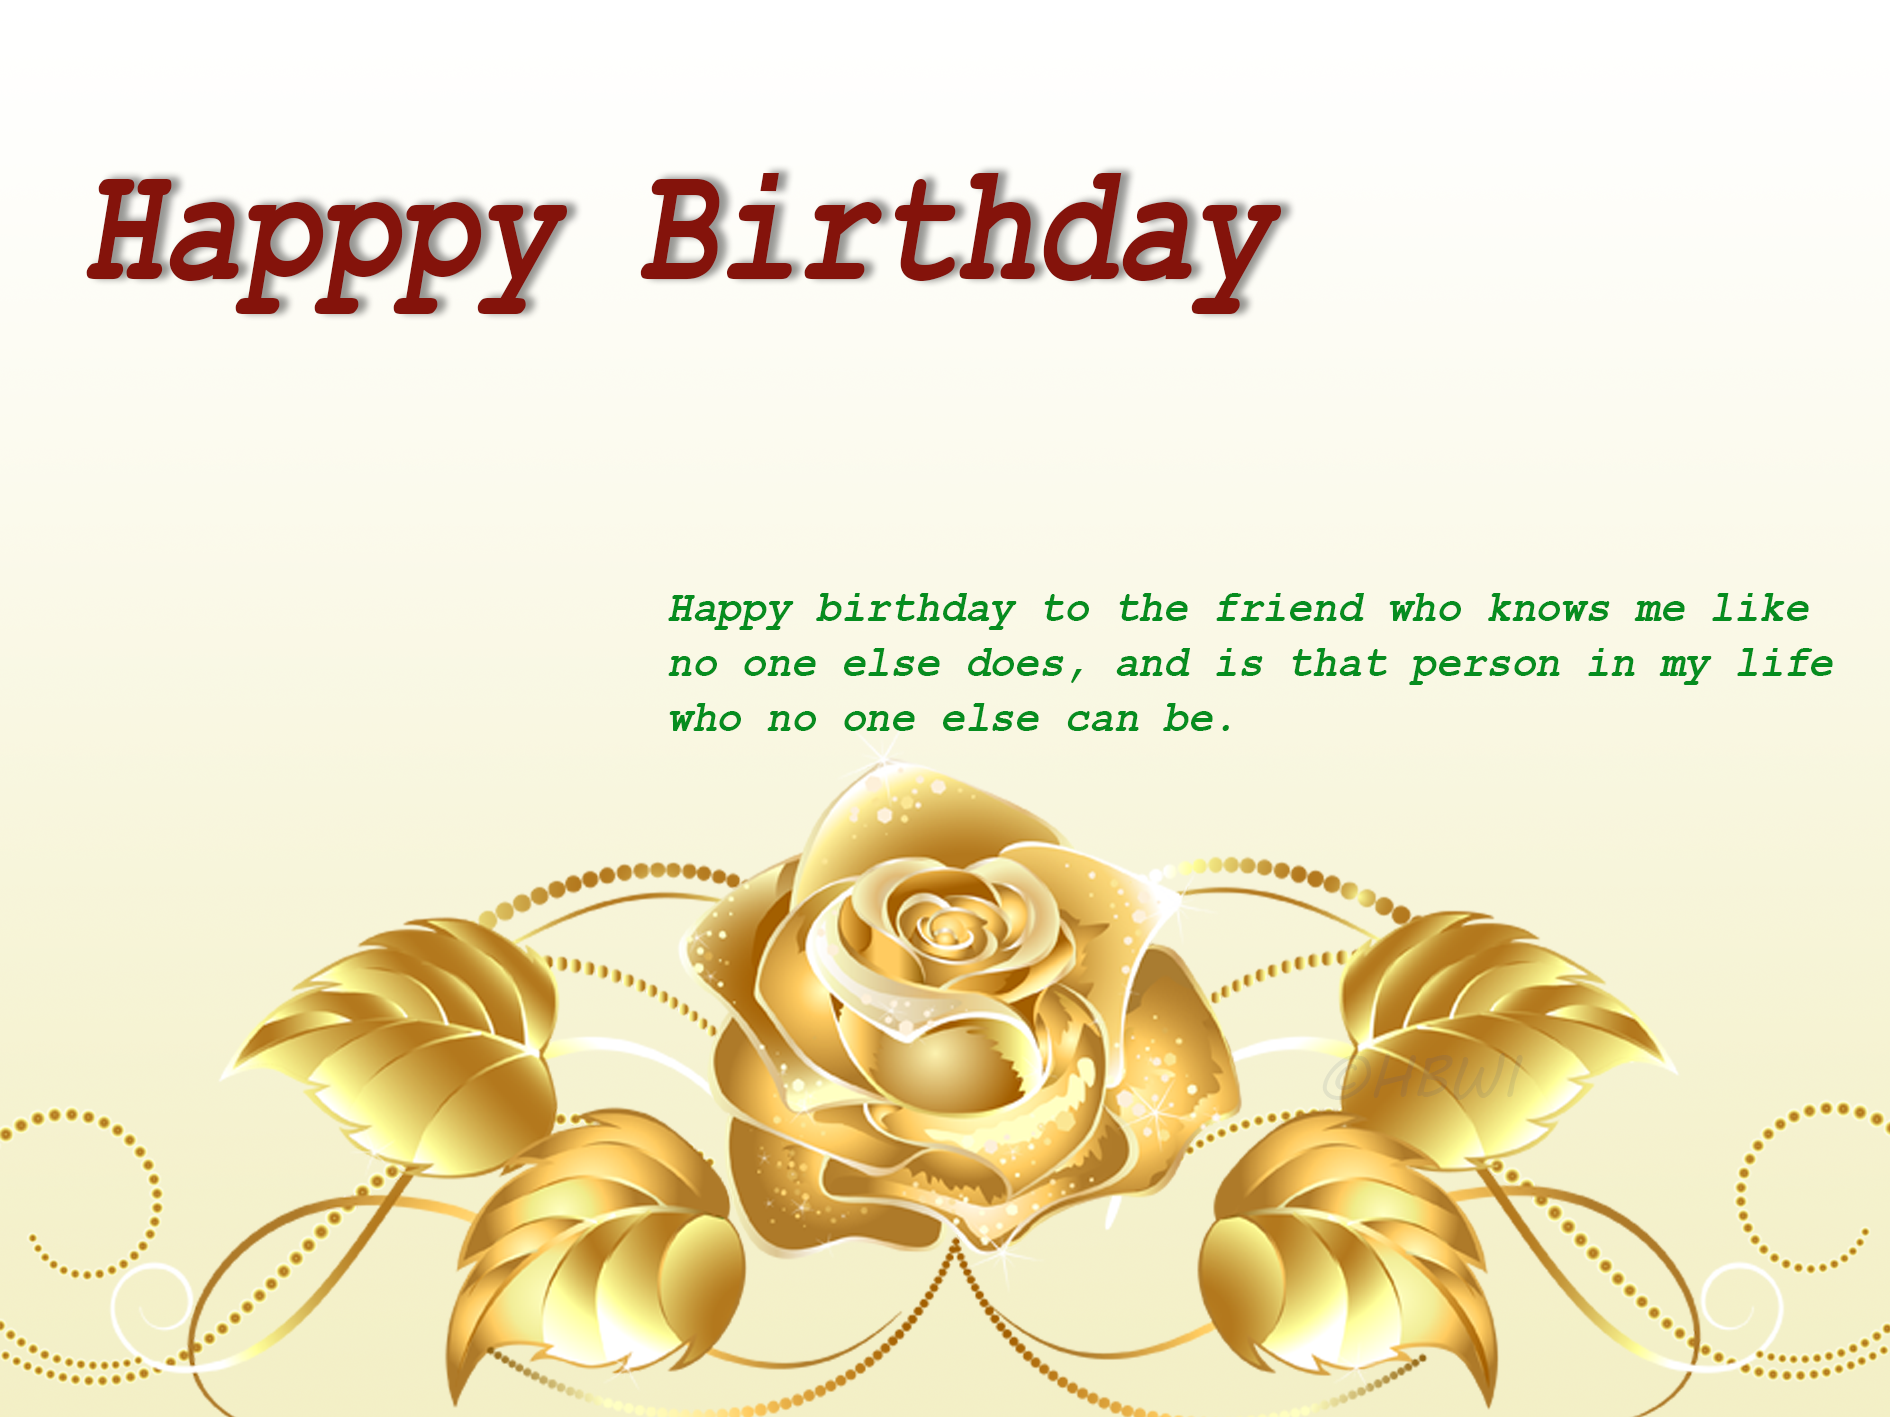 Golden Rose Happy Birthday Image - Gold Flowers Transparent Background , HD Wallpaper & Backgrounds